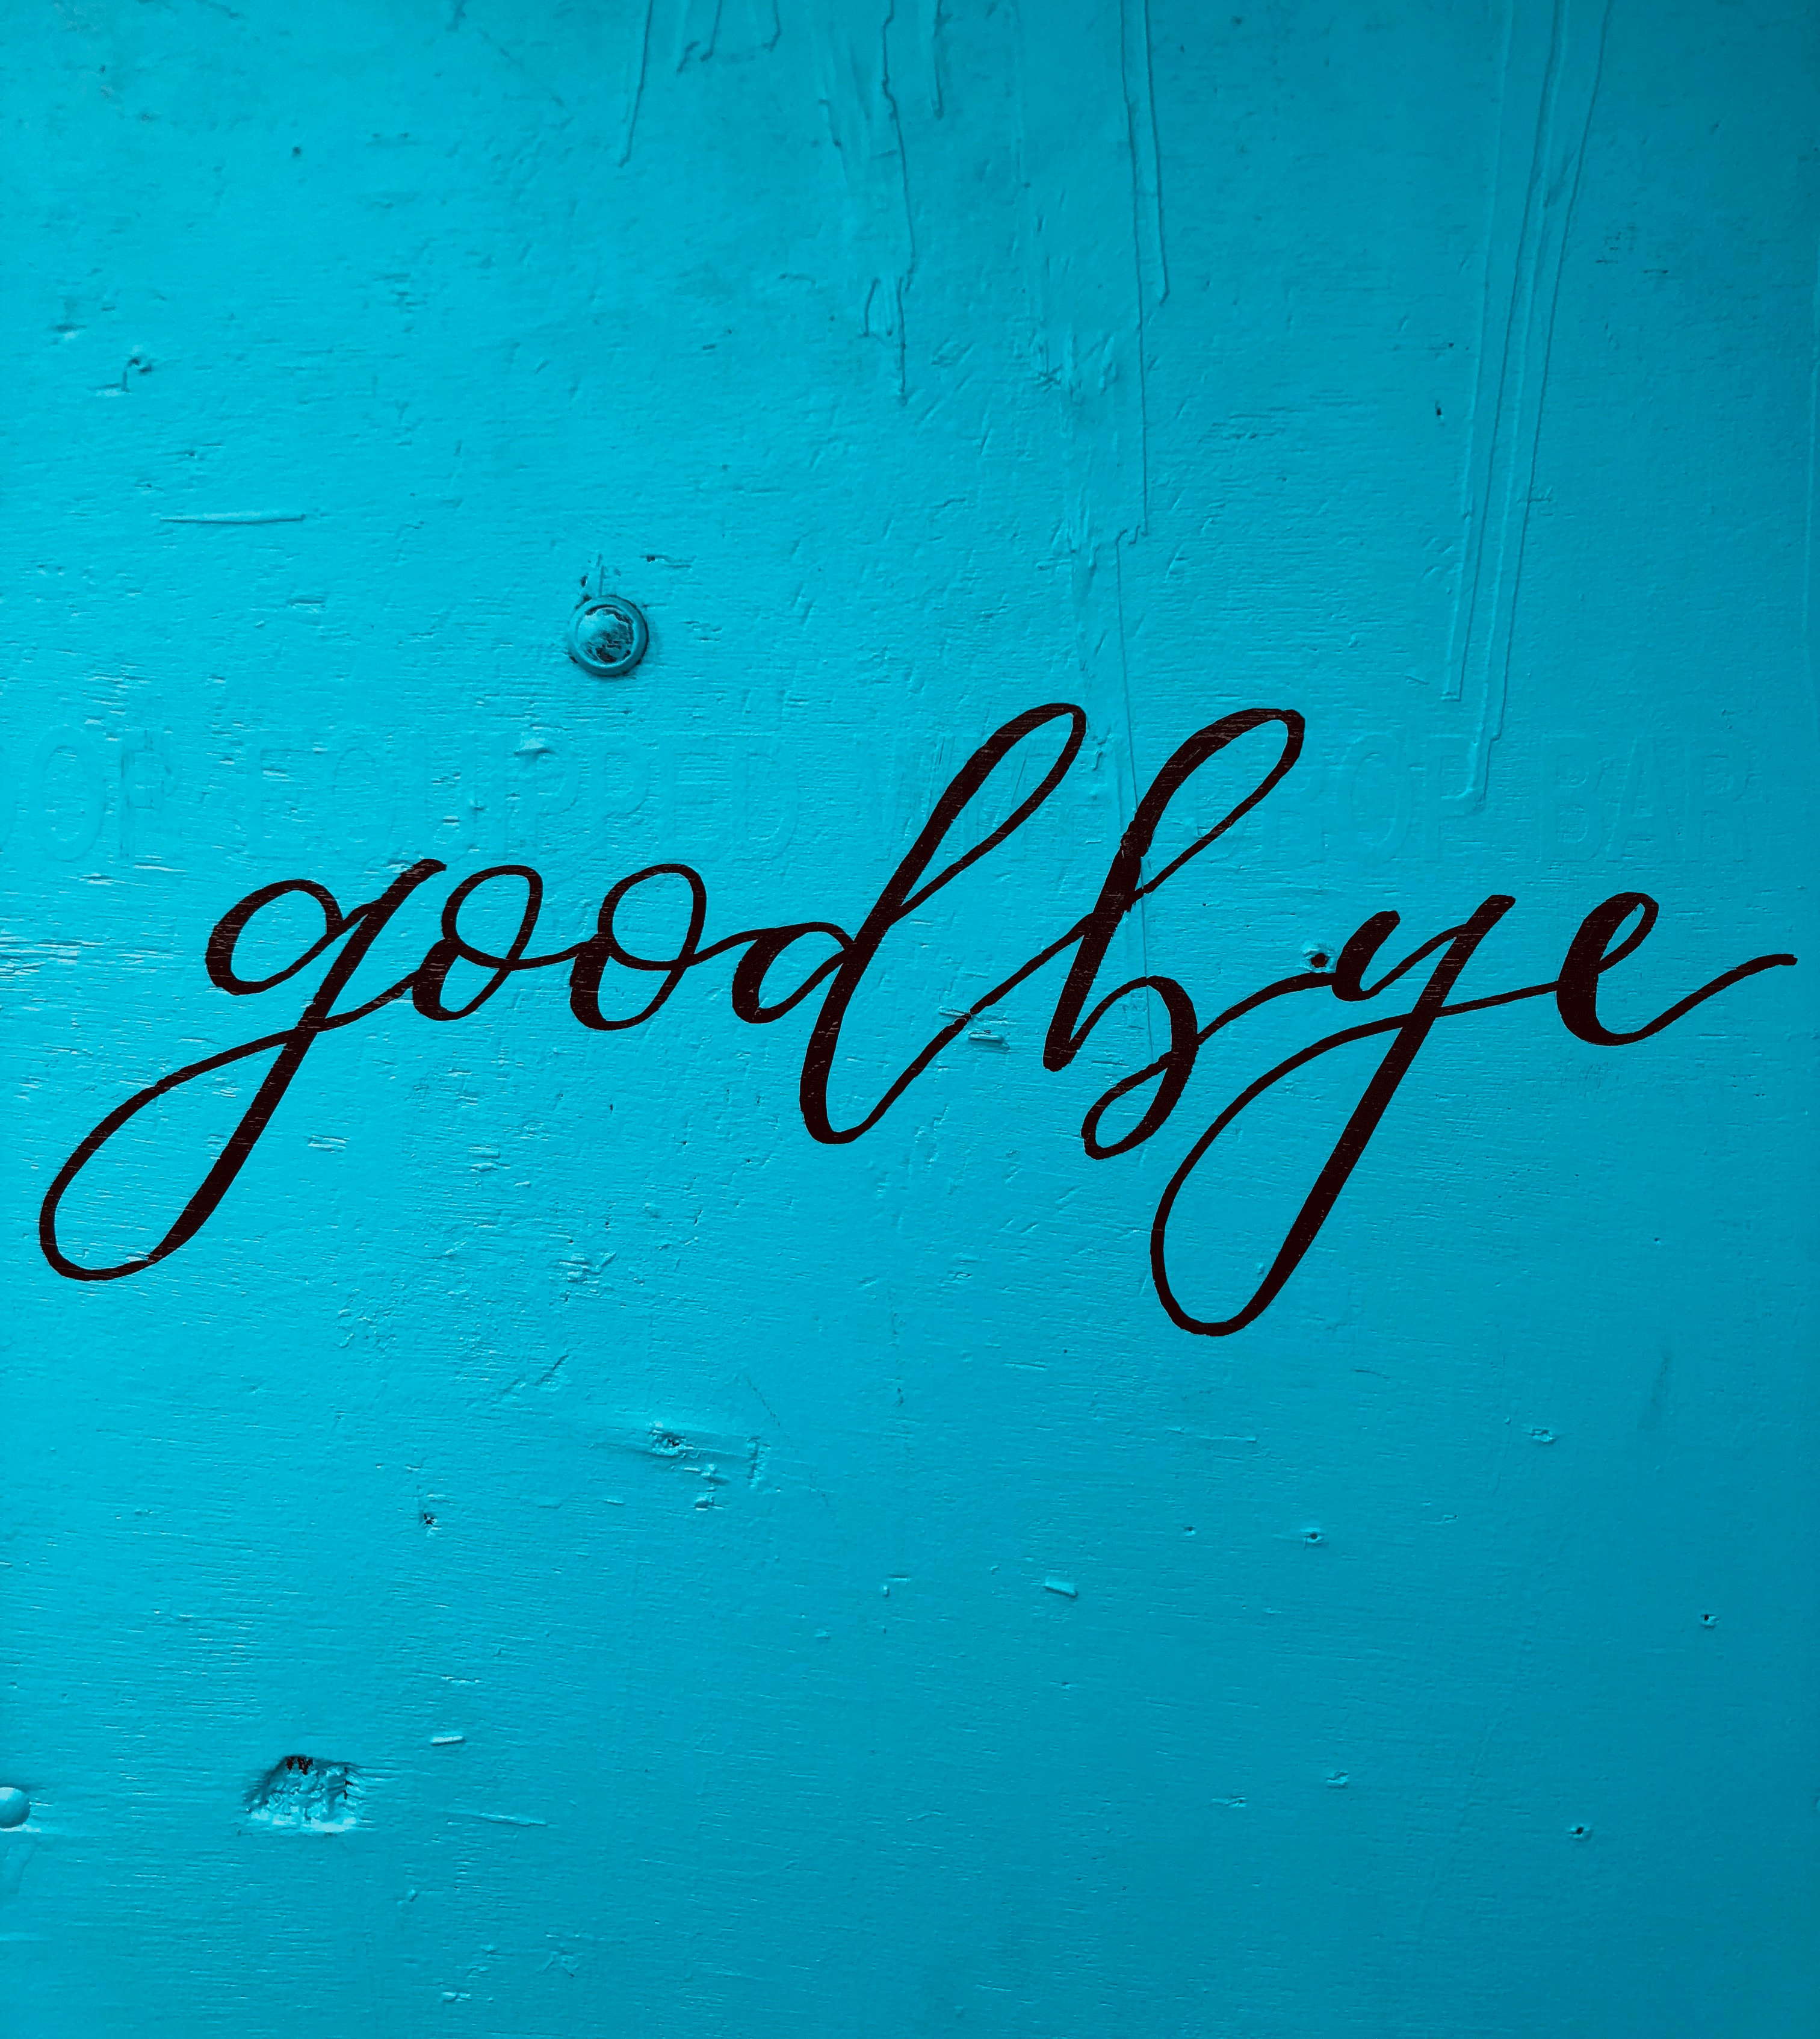 A teal wood panel with the word, "goodbye," painted on it.